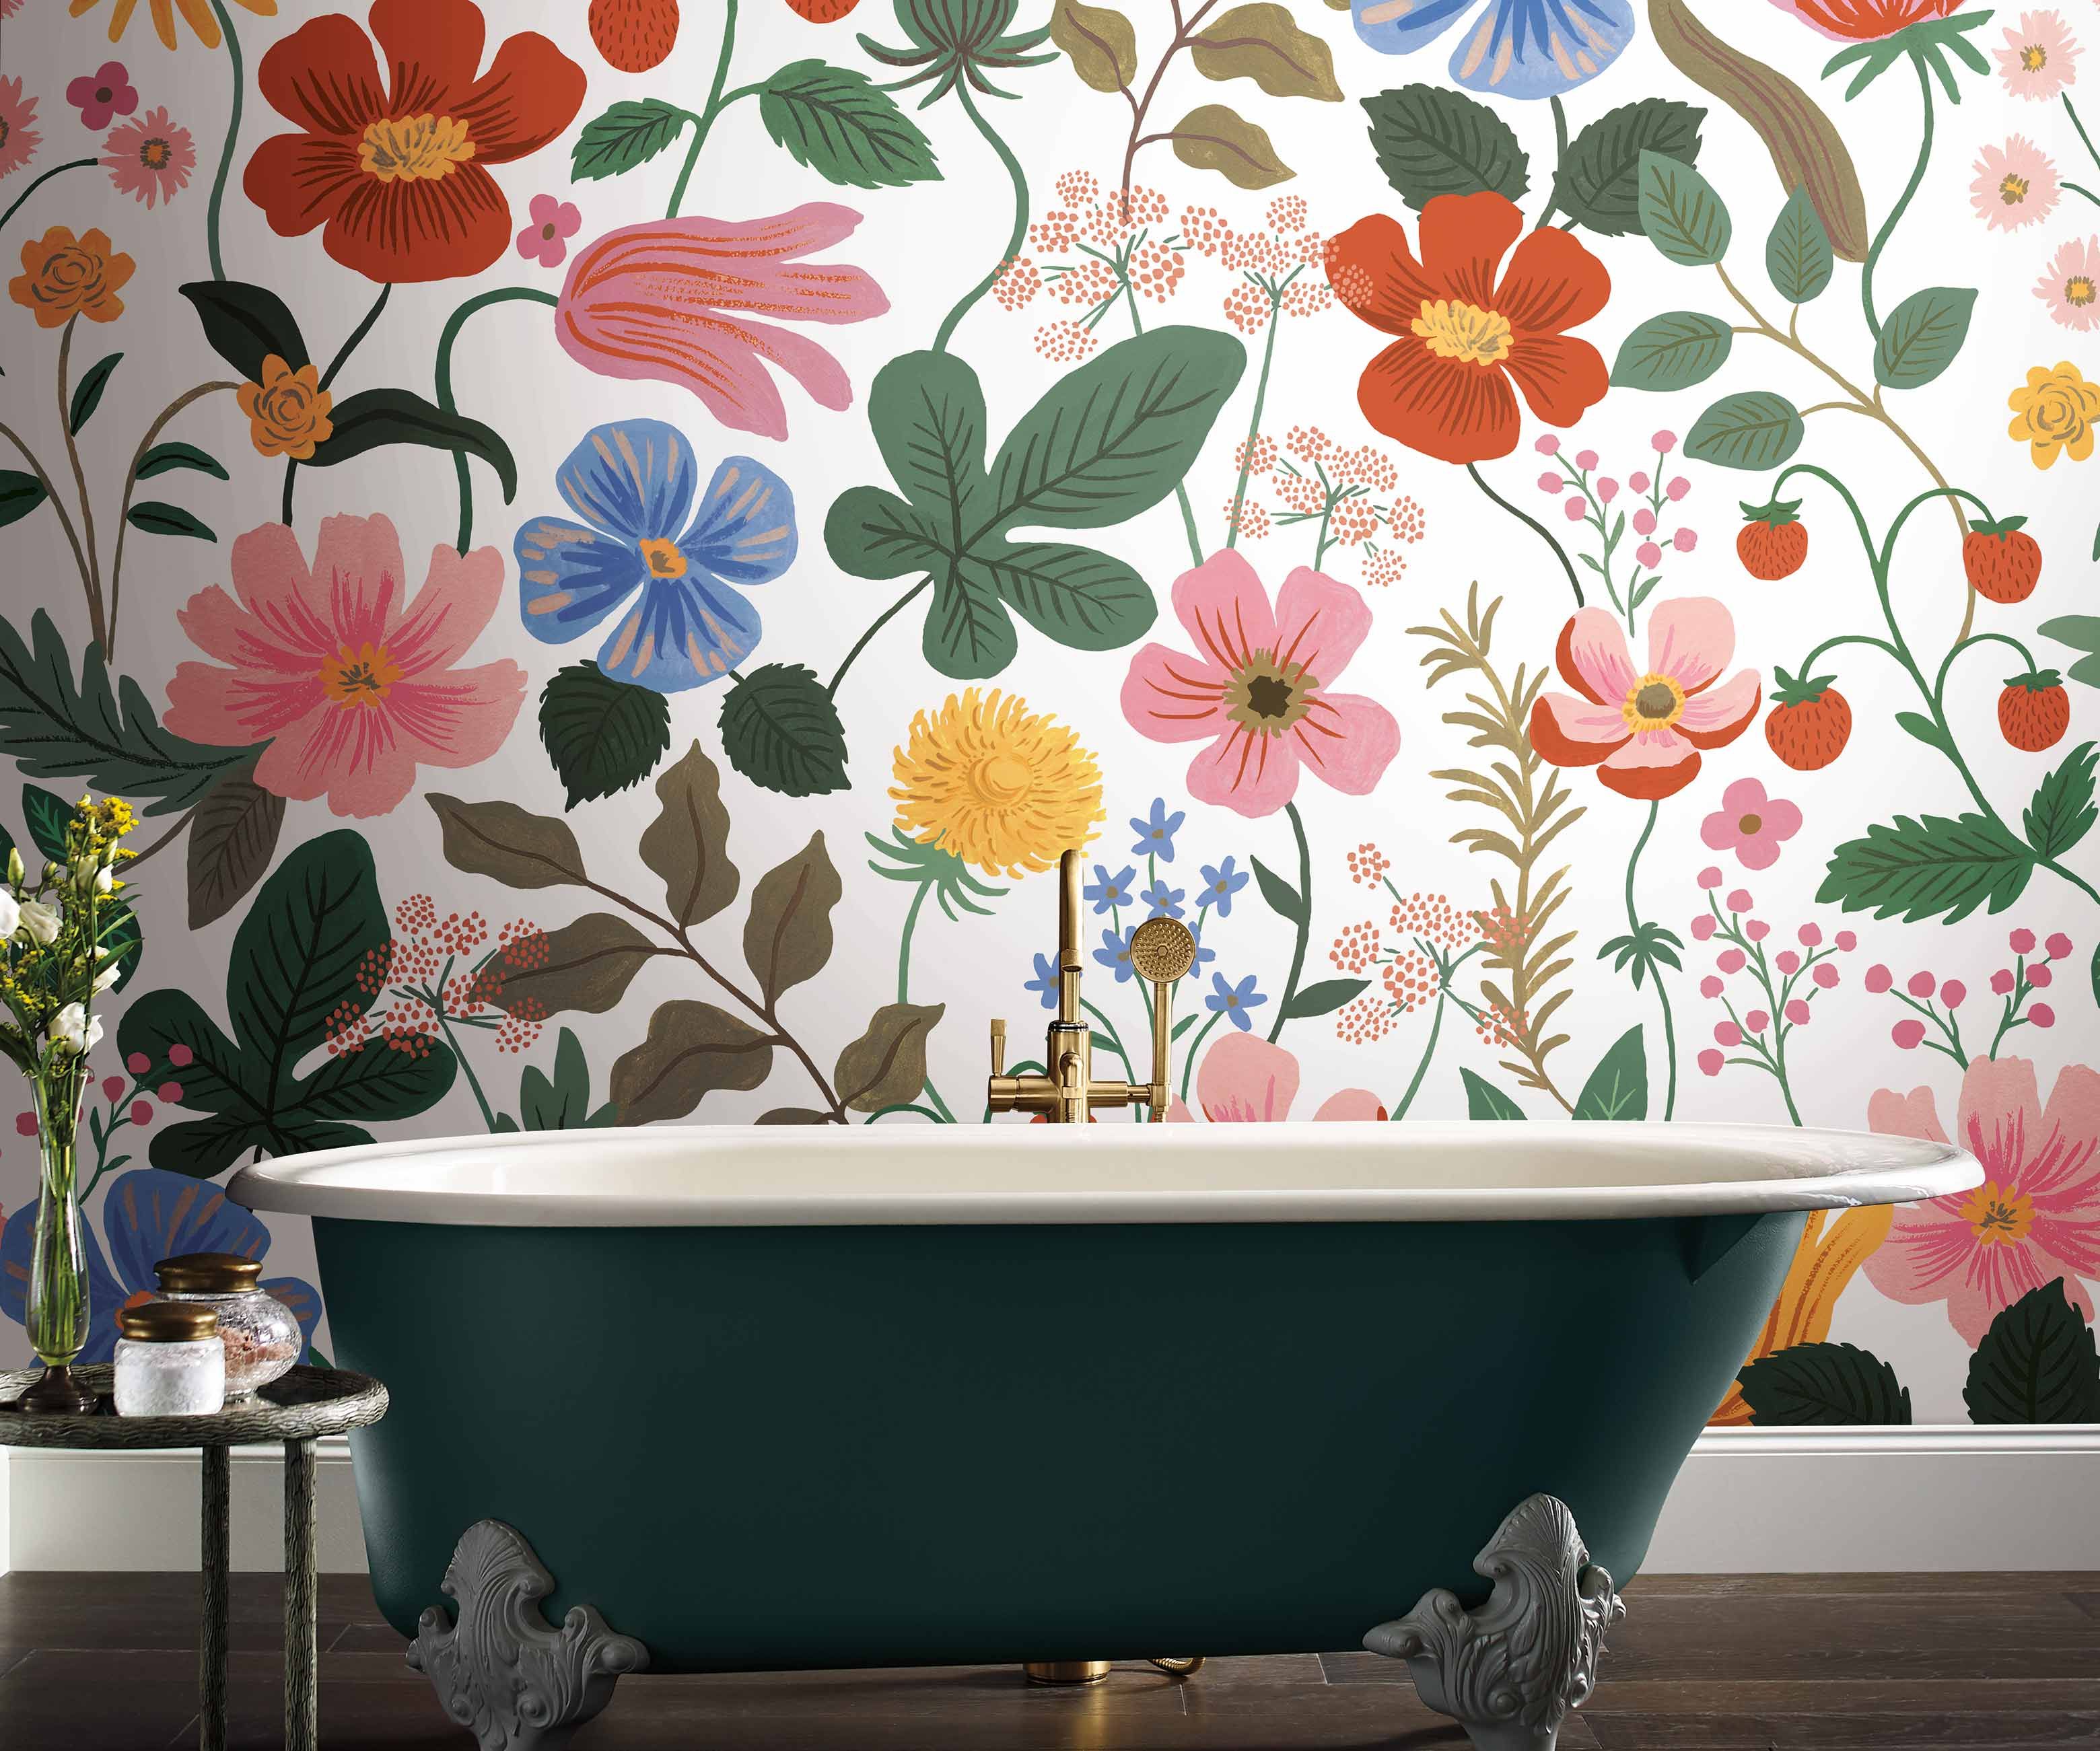 5 Creative Ways to Use Peel and Stick Wallpaper  A Beautiful Mess